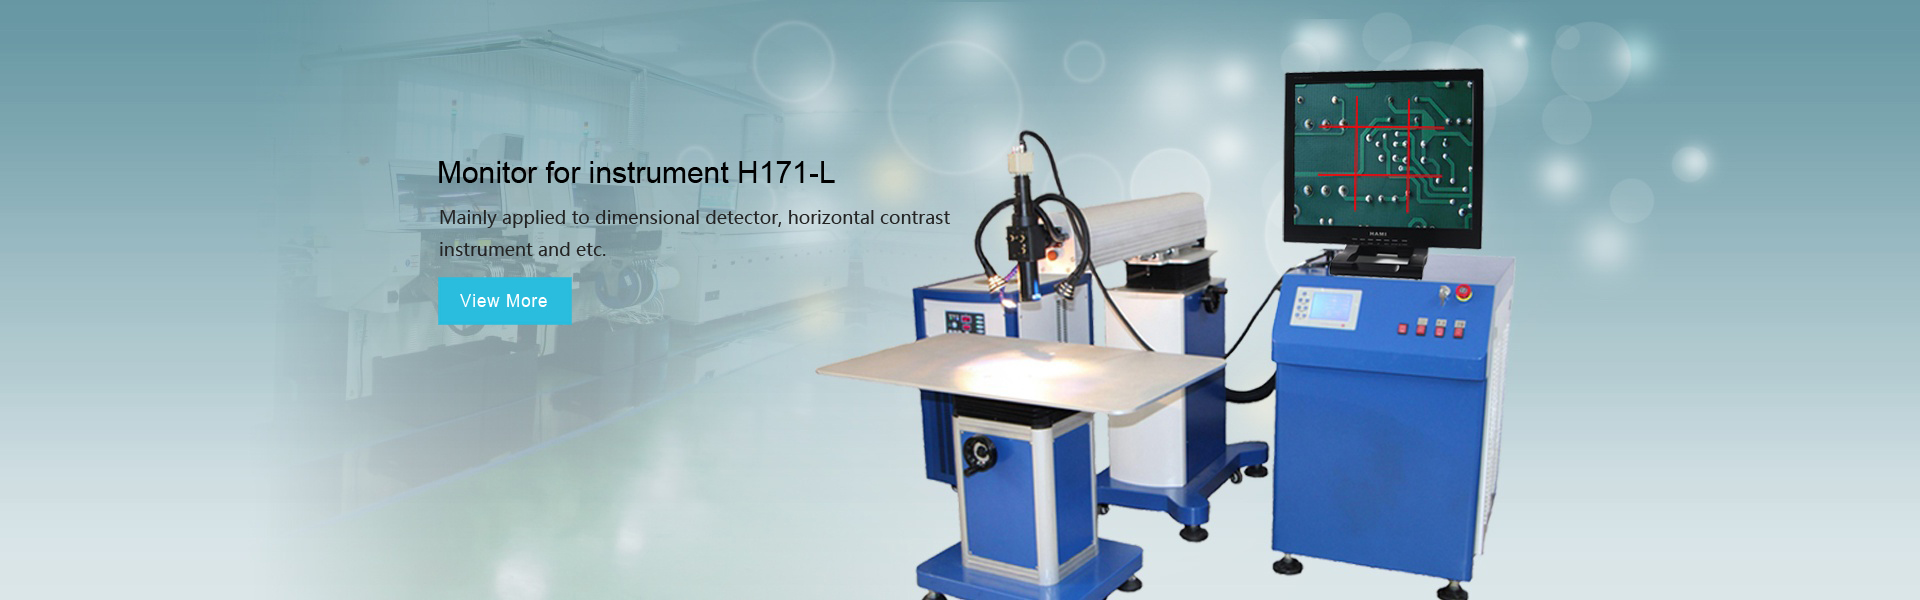 Mainly applied to dimensional detector, horizontal contrast instrument and etc.